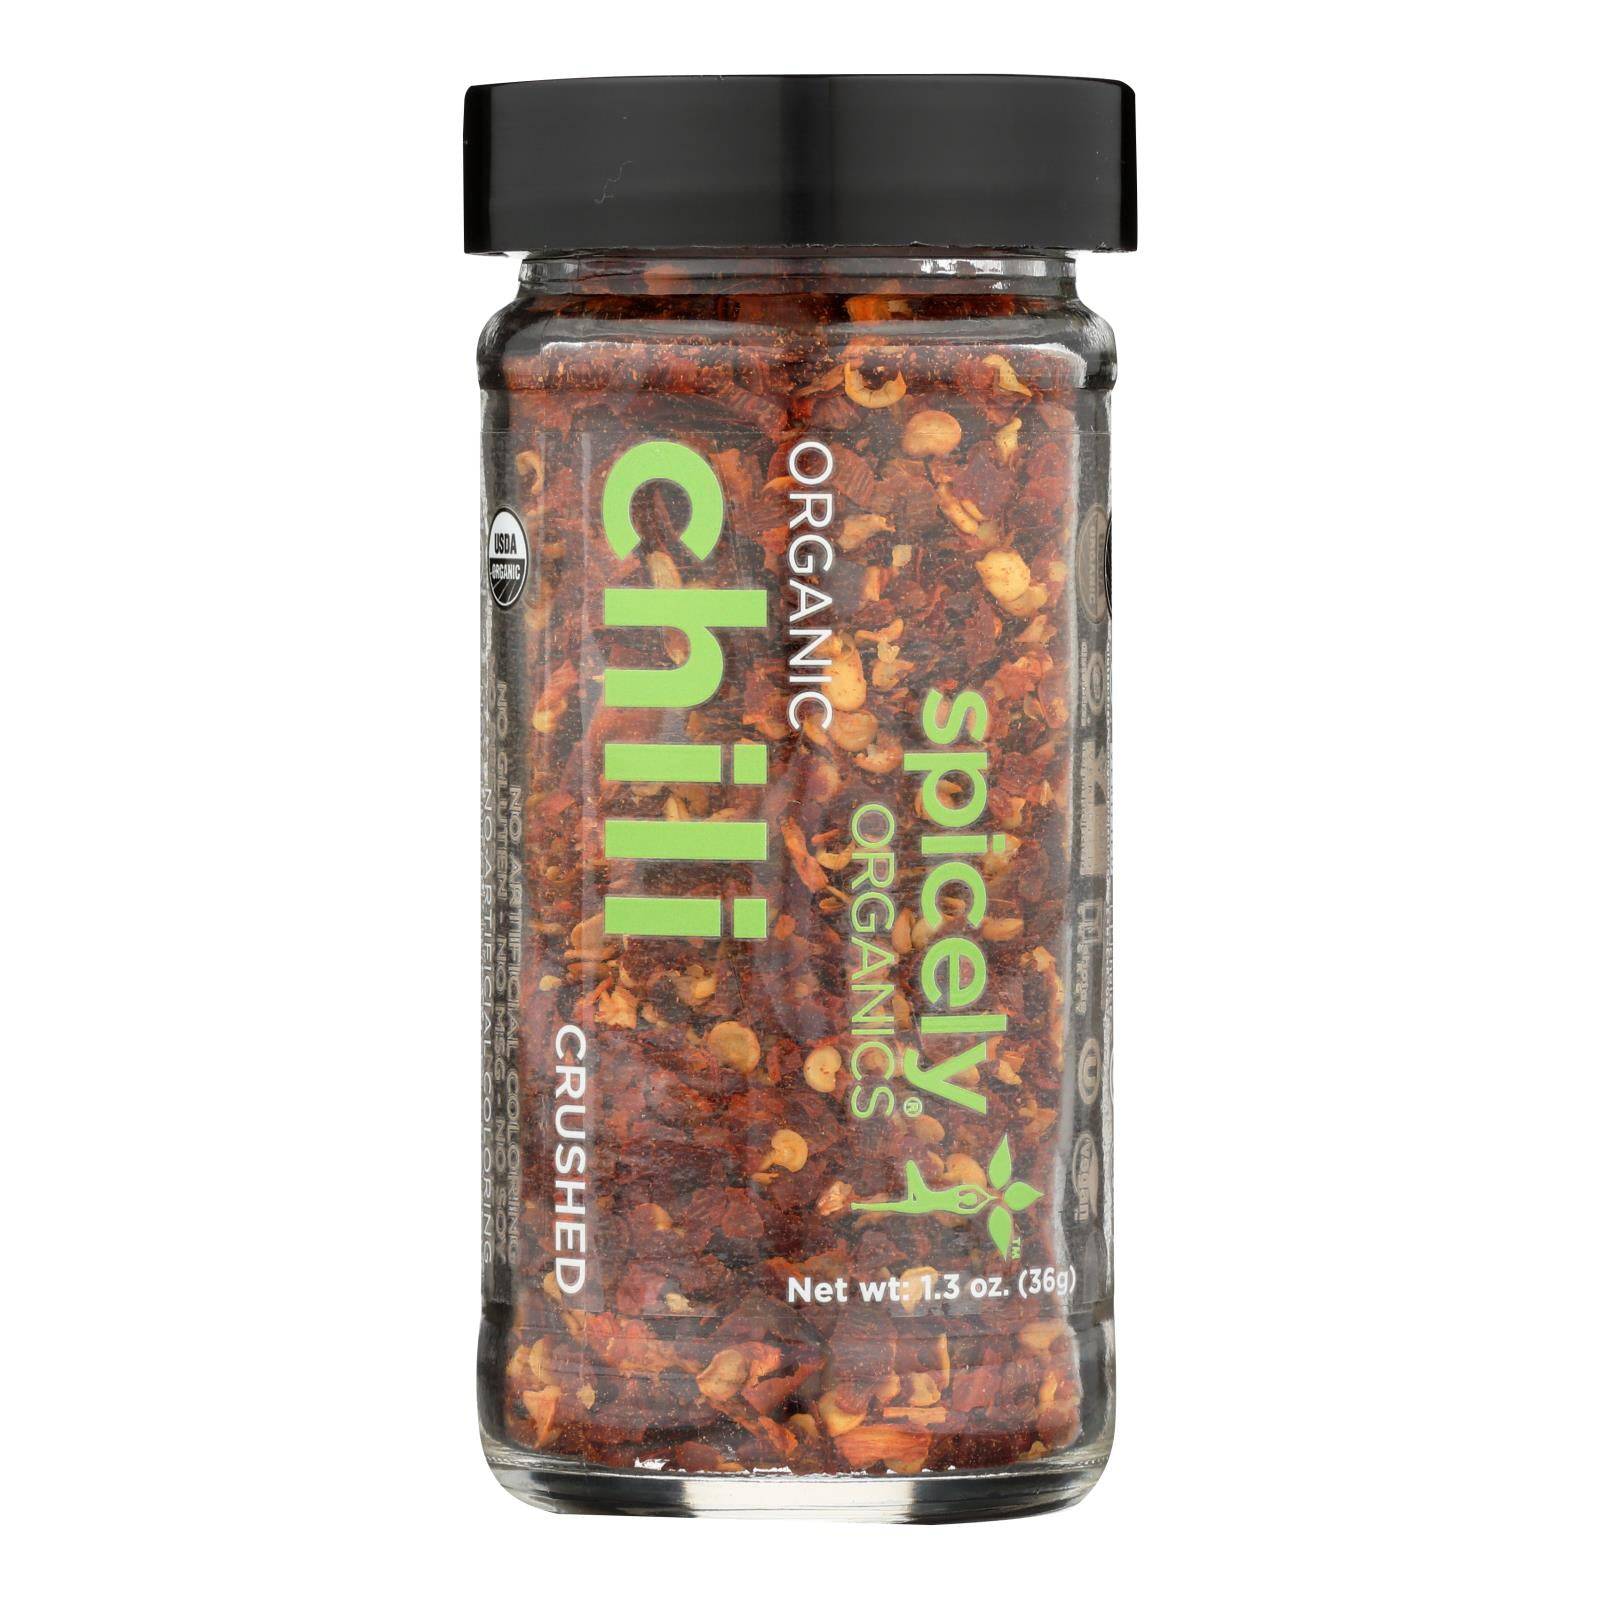 Spicely Organics - Organic Chili - Crushed - Case Of 3 - 1.3 Oz. | OnlyNaturals.us